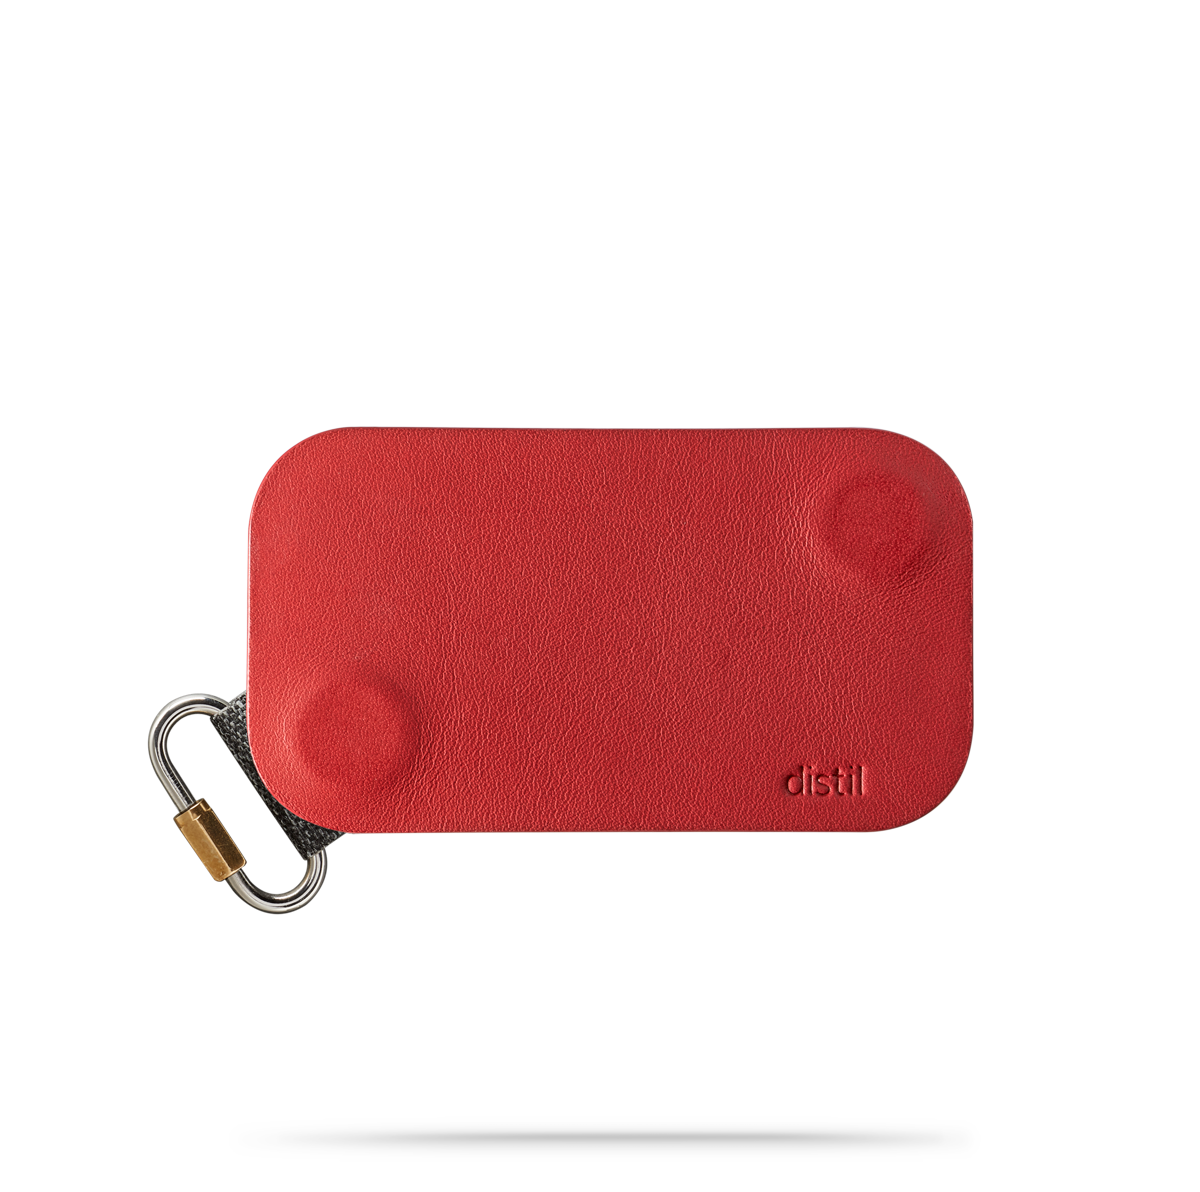 distil red leather keyfolio with attached fobring on a white backdrop